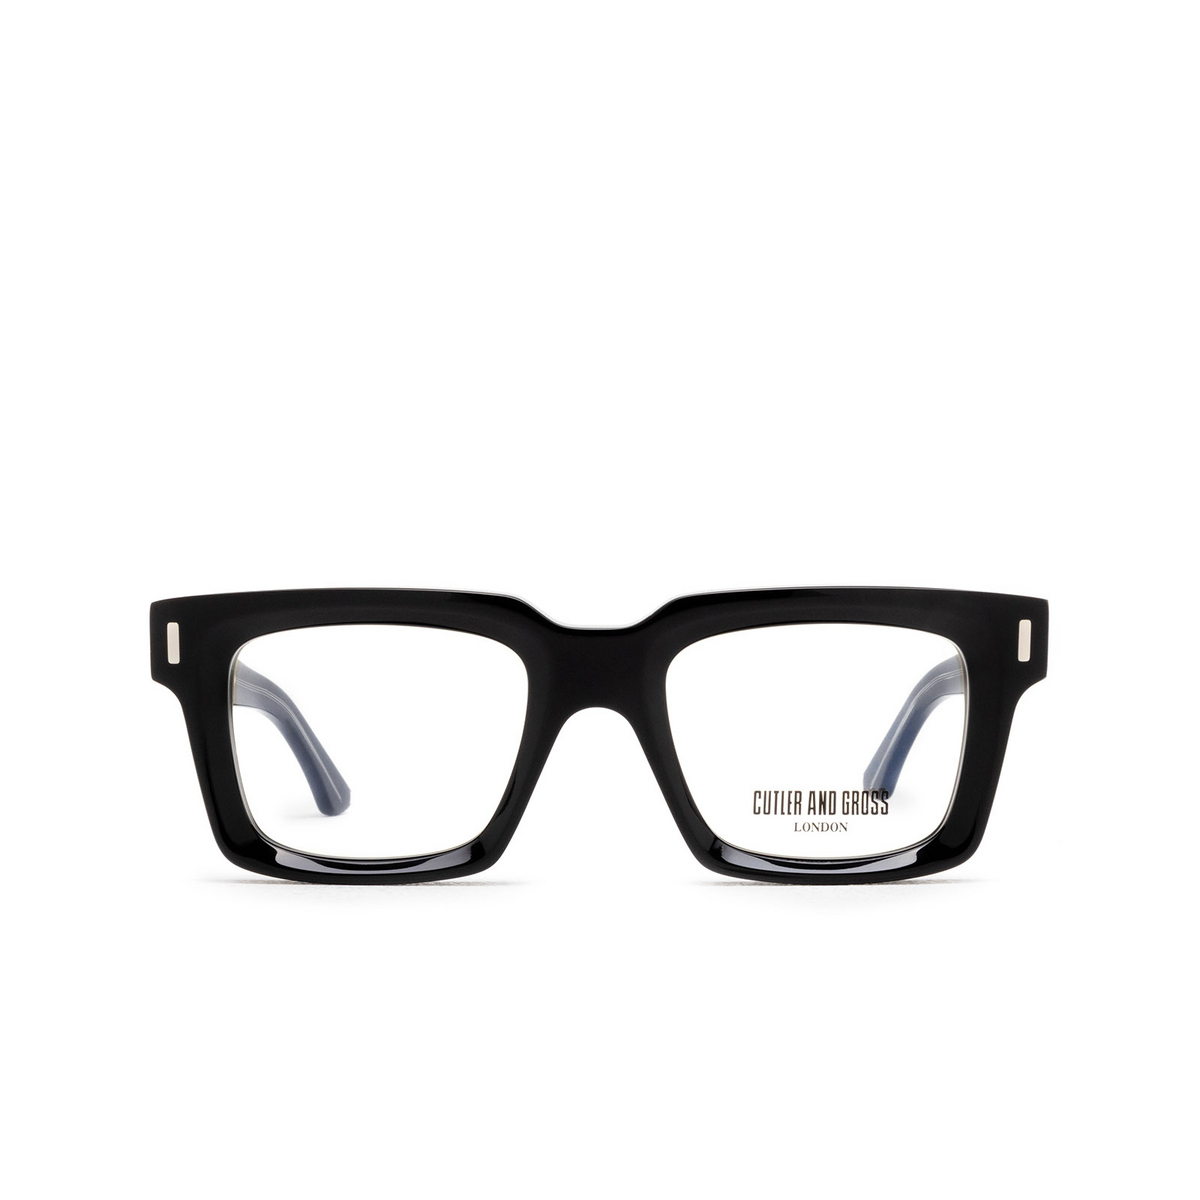 Cutler and Gross 1386 Eyeglasses 01 Black - front view